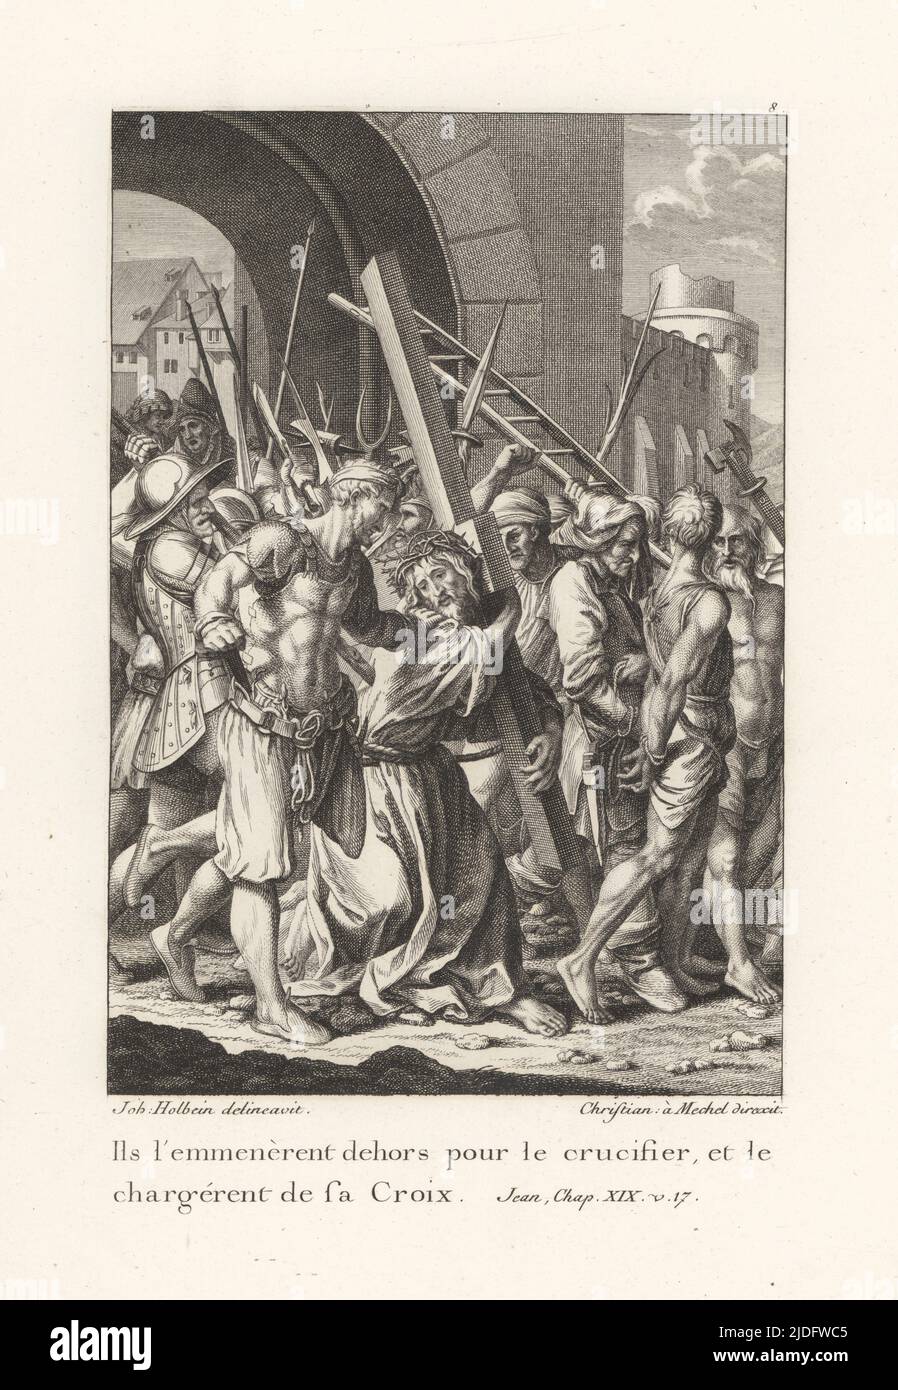 Jesus Christ forced to carry his own cross to his crucifixion. Ils l'emmenerent dehors pour le crucifier, et le chargerent de sa croix. John XIX v. 17. From Le Passion de Notre Seigneur, The Passion of our Lord. Copperplate engraving by Christian Mechel after a portrait by Hans Holbein in Christian von Mechel's Oeuvre de Jean Holbein, Chez Guillaume Haas, Basel, 1784. Stock Photo